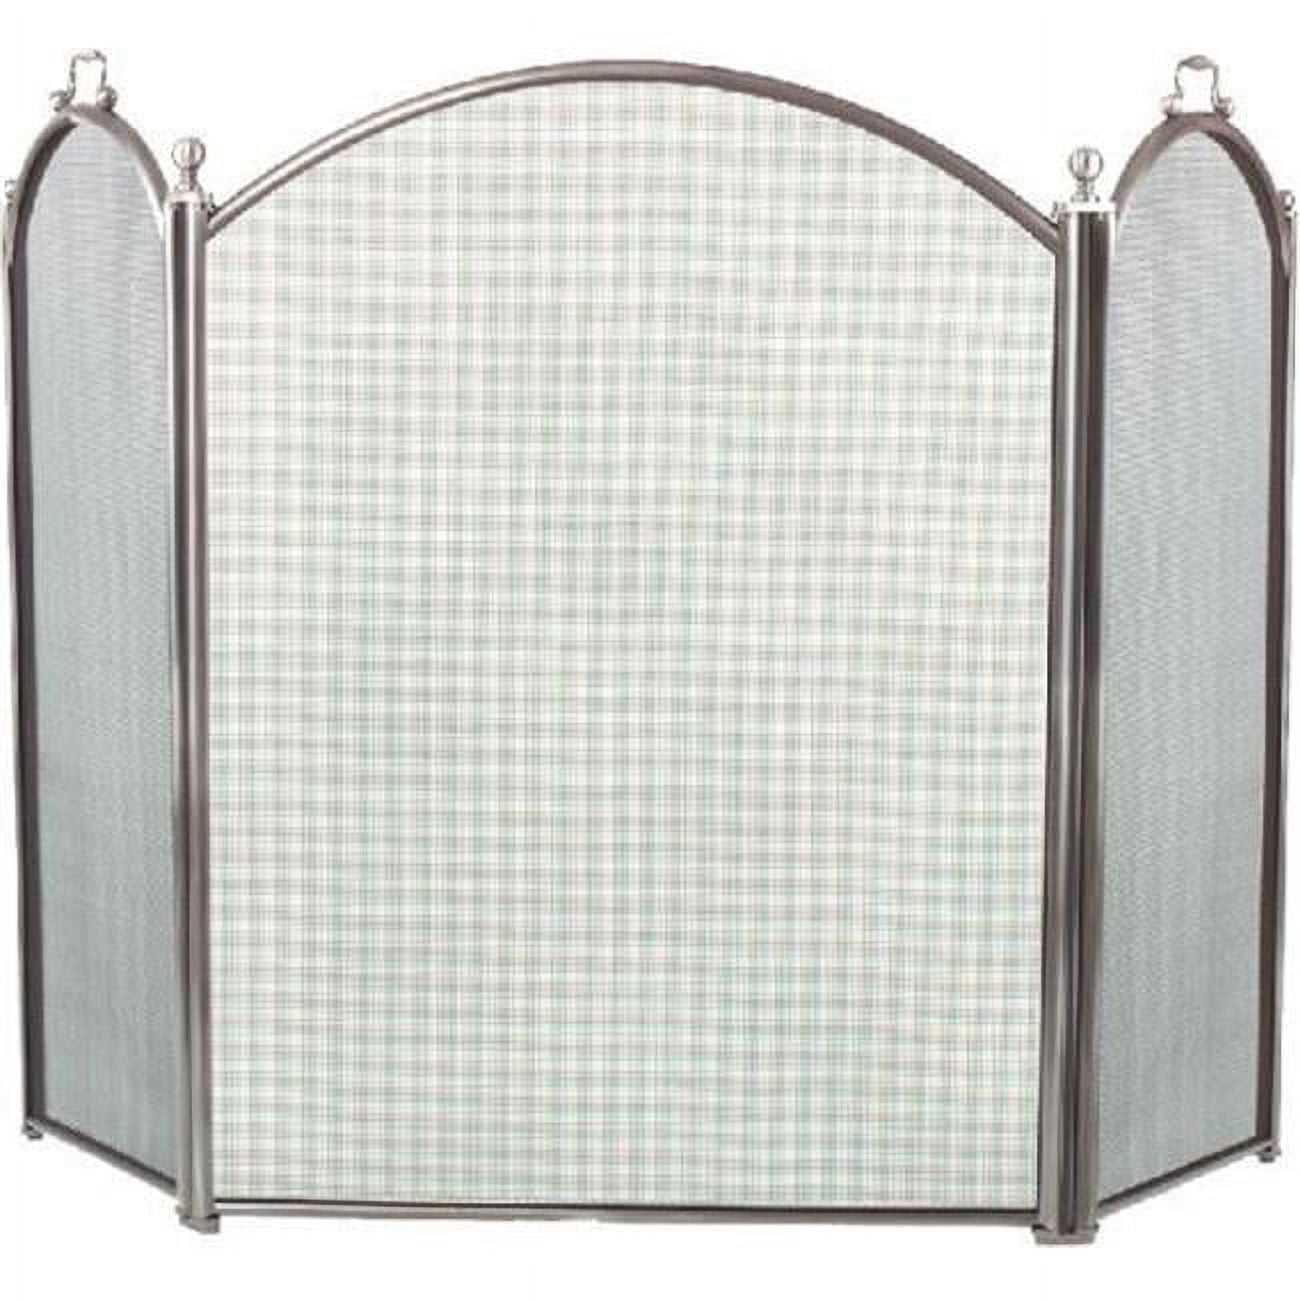 Picture of Dagan 7383-29 3 Fold Arched Screen, Pewter